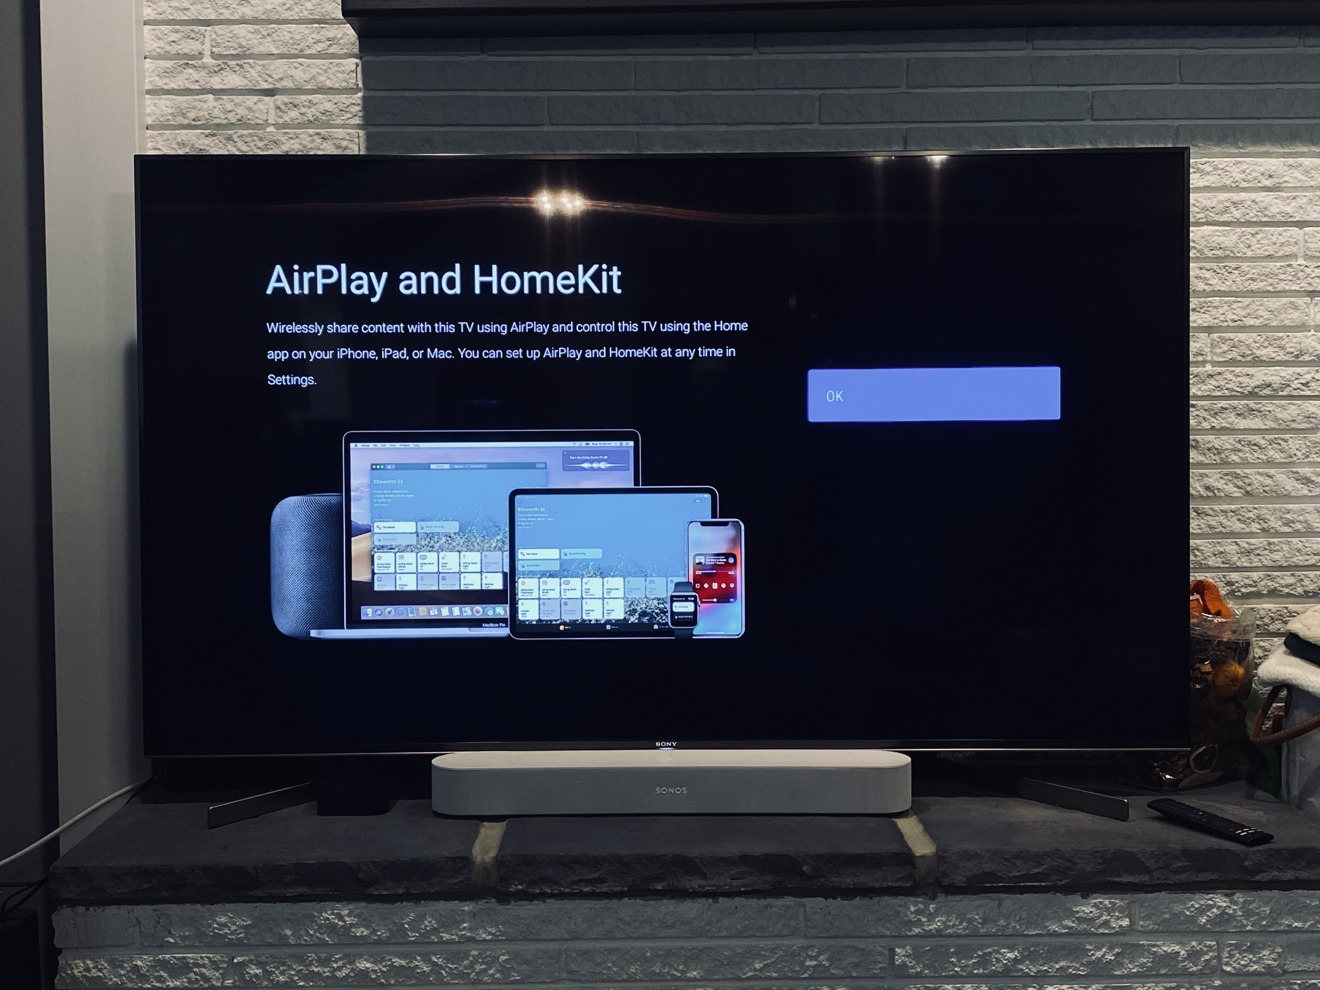 Hot And Airplay 2 On Sony Smart Tvs, Screen Mirroring My Ipad To Sony Tv